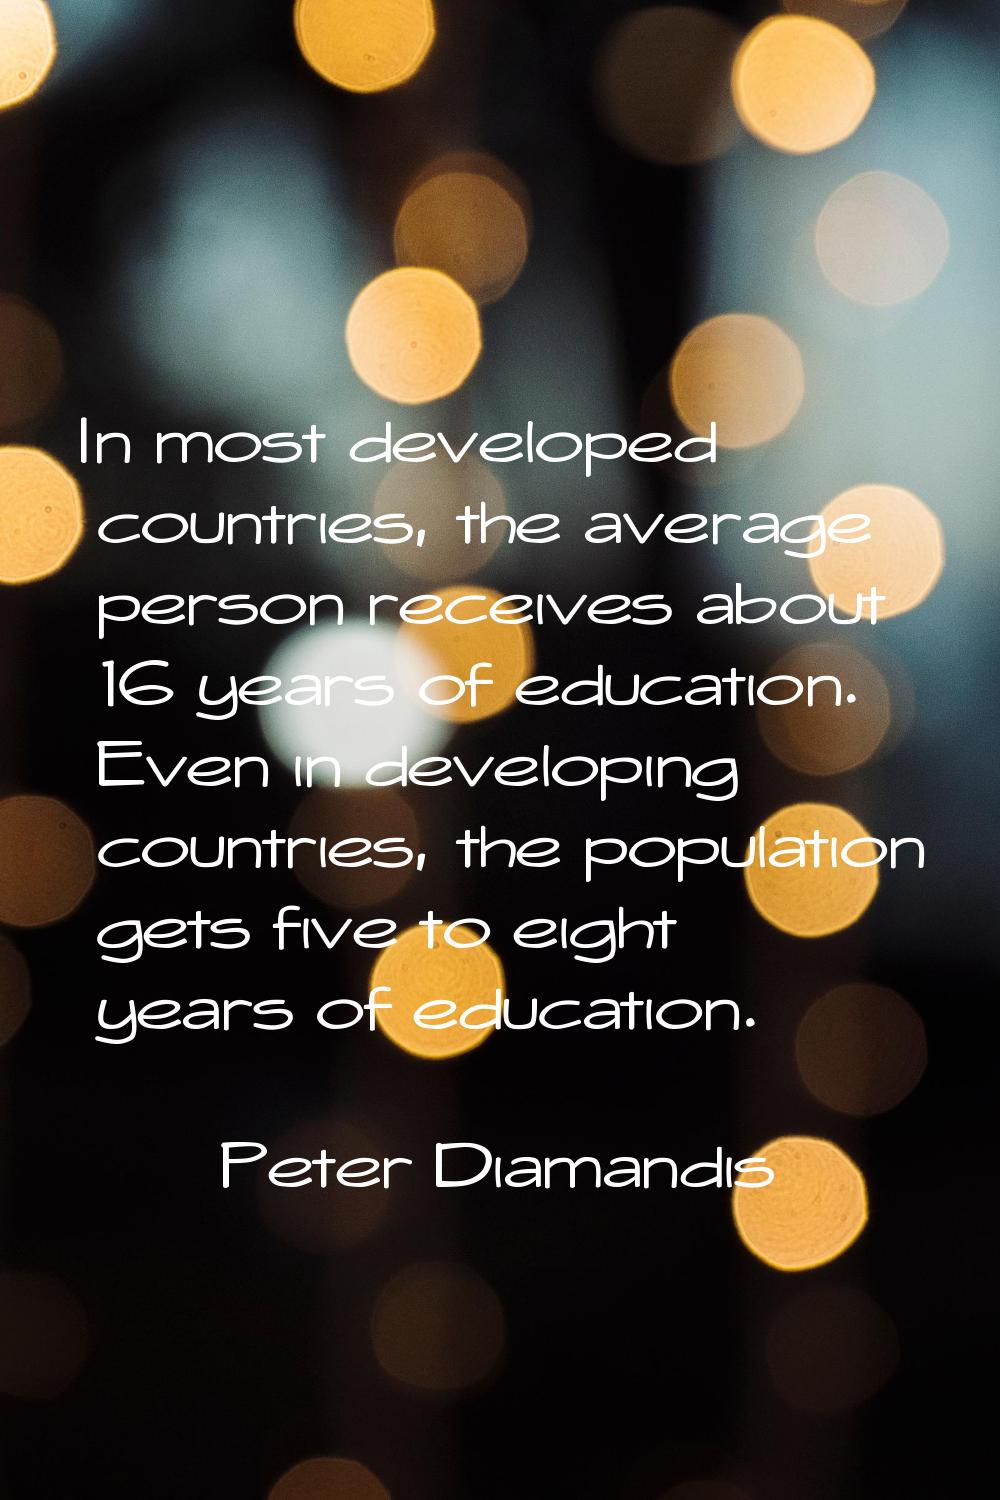 In most developed countries, the average person receives about 16 years of education. Even in devel